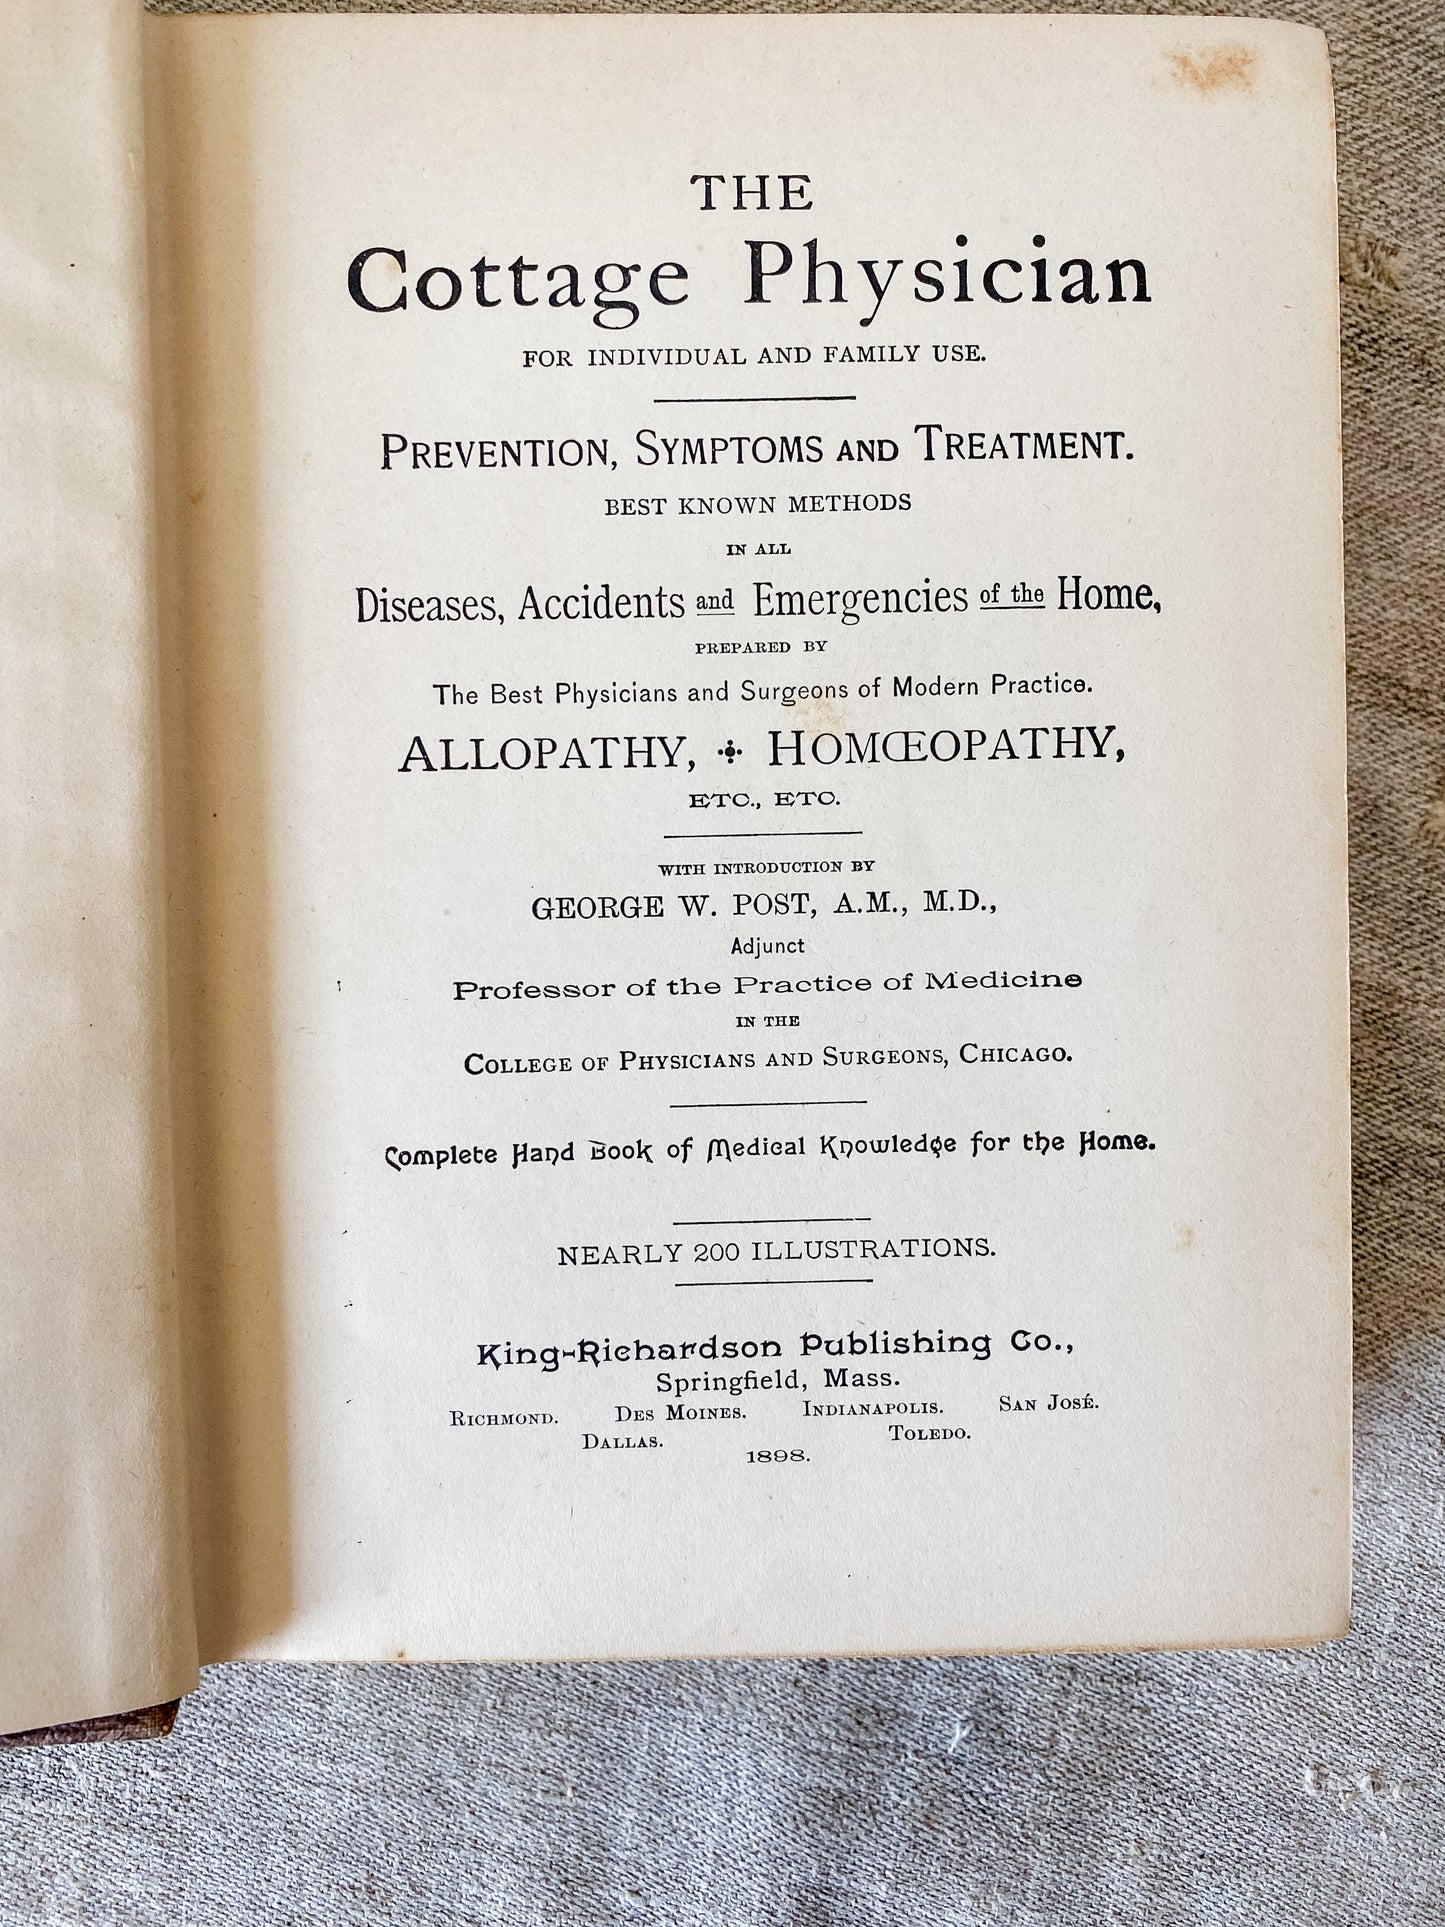 The Cottage Physician | Antique Home Medical Advice Book, 1895